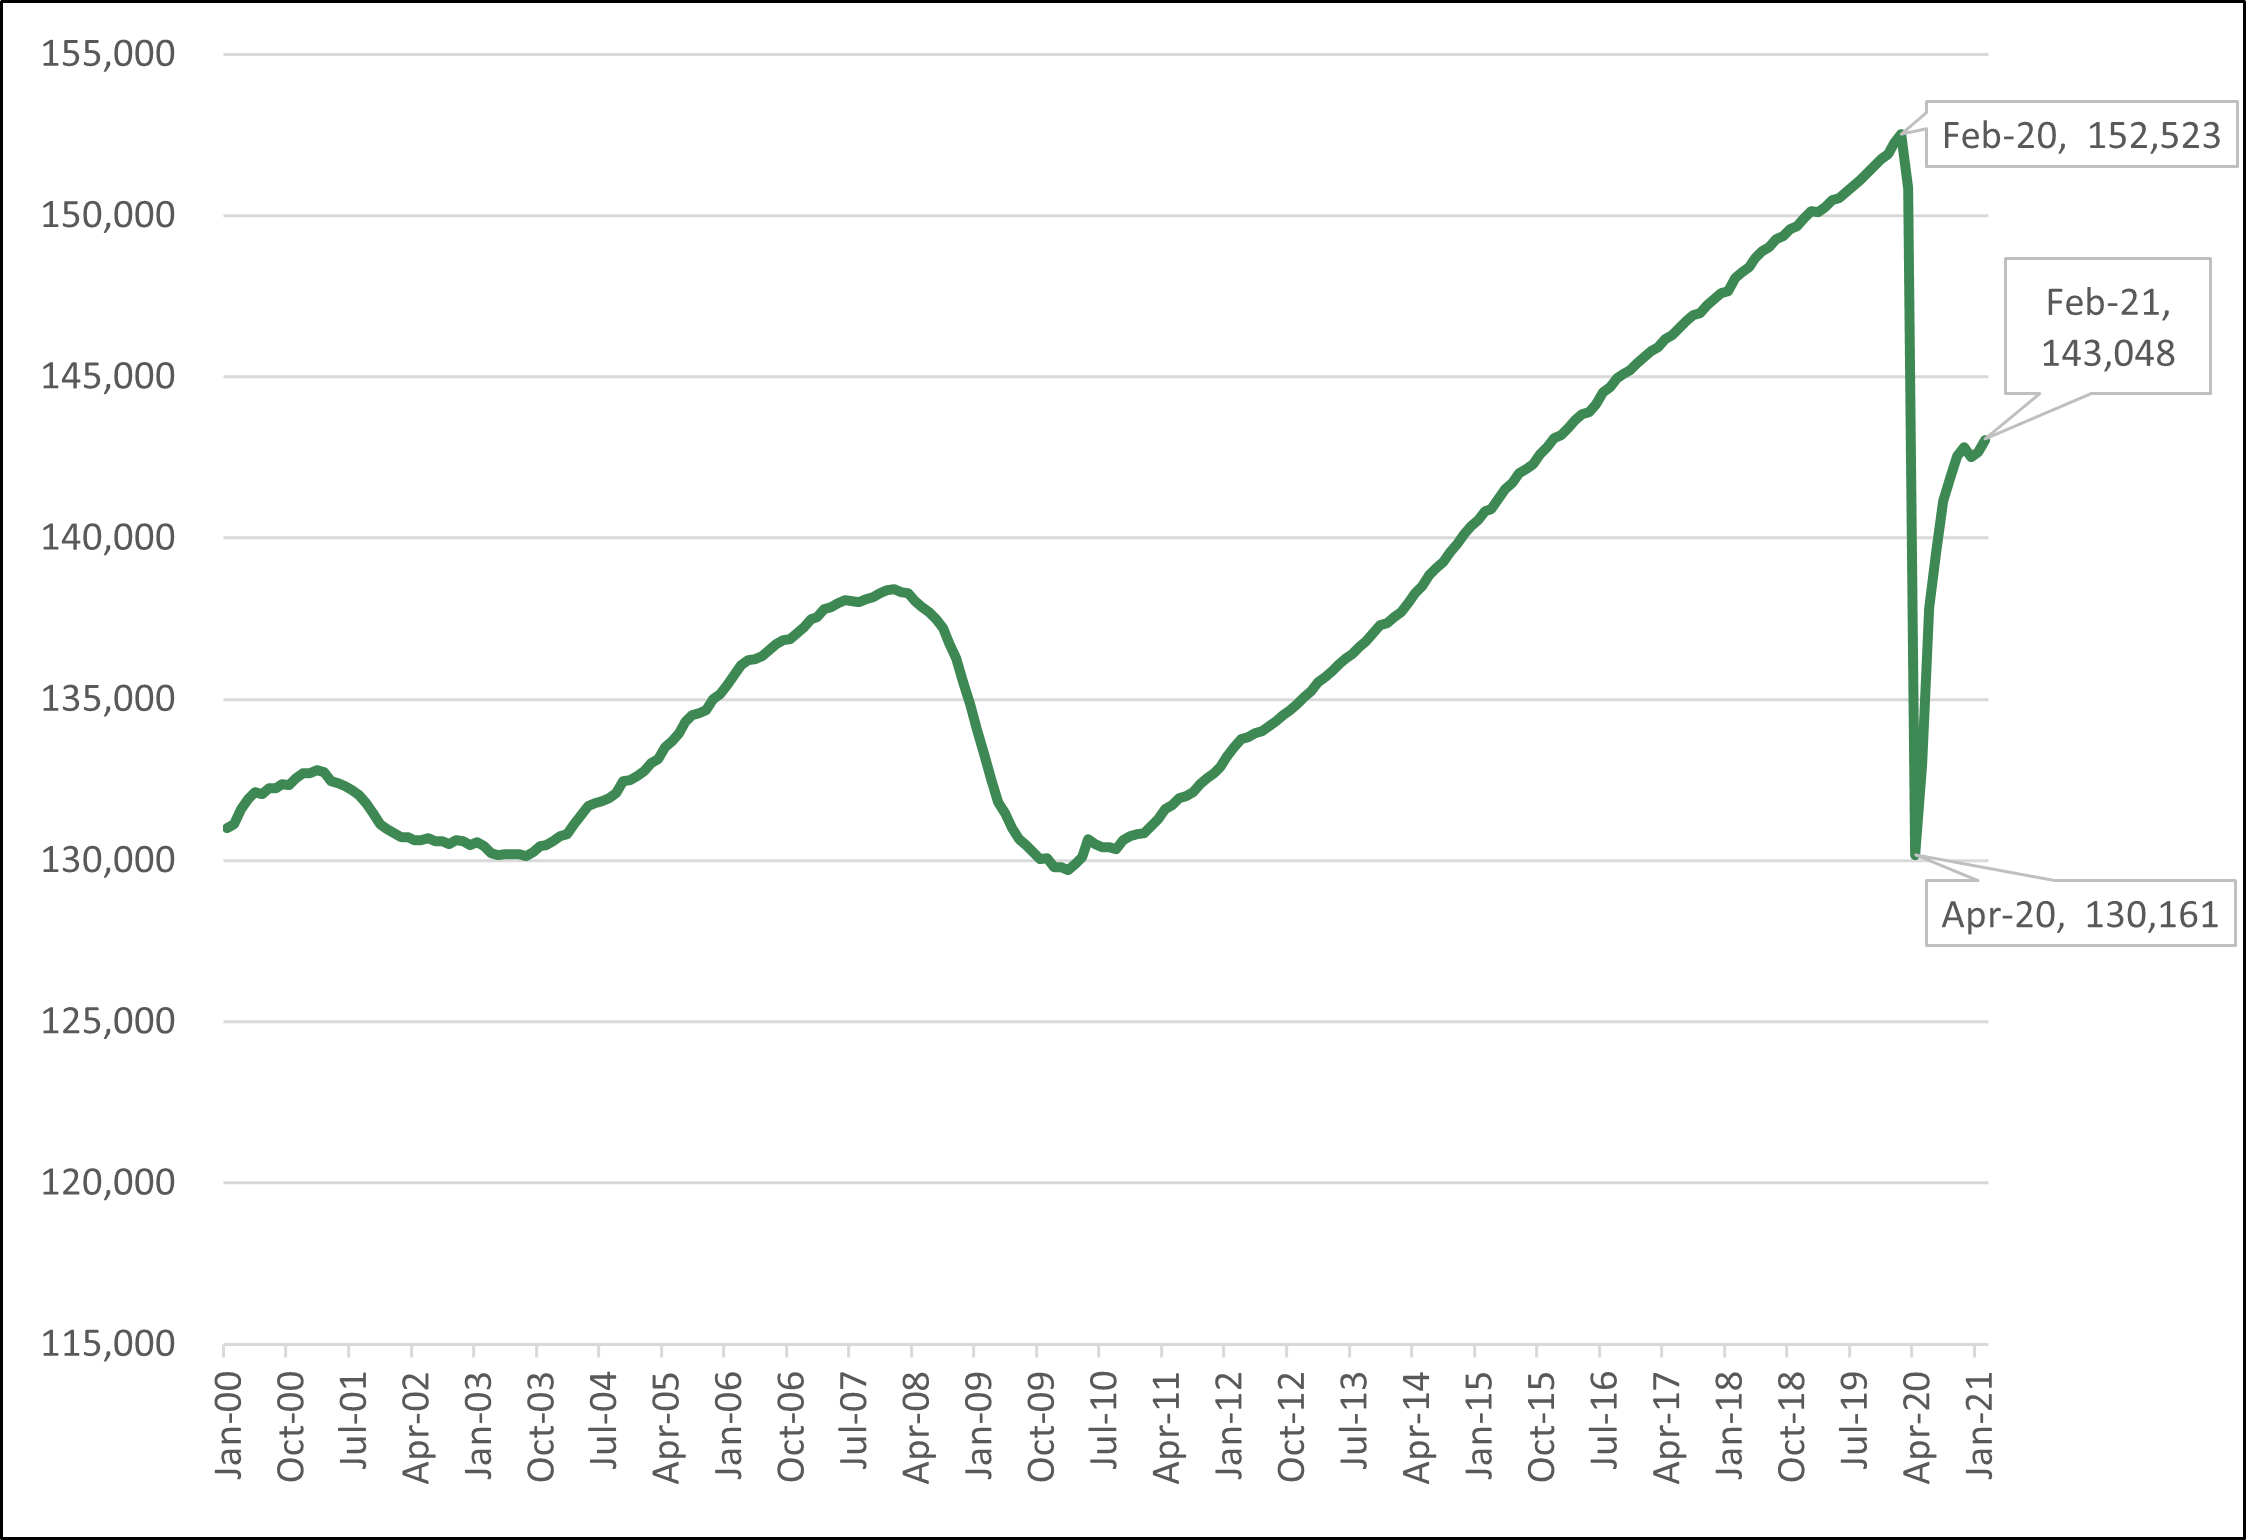 Line graph depicting total US non-farm payrolls from January 2000 to January 2021